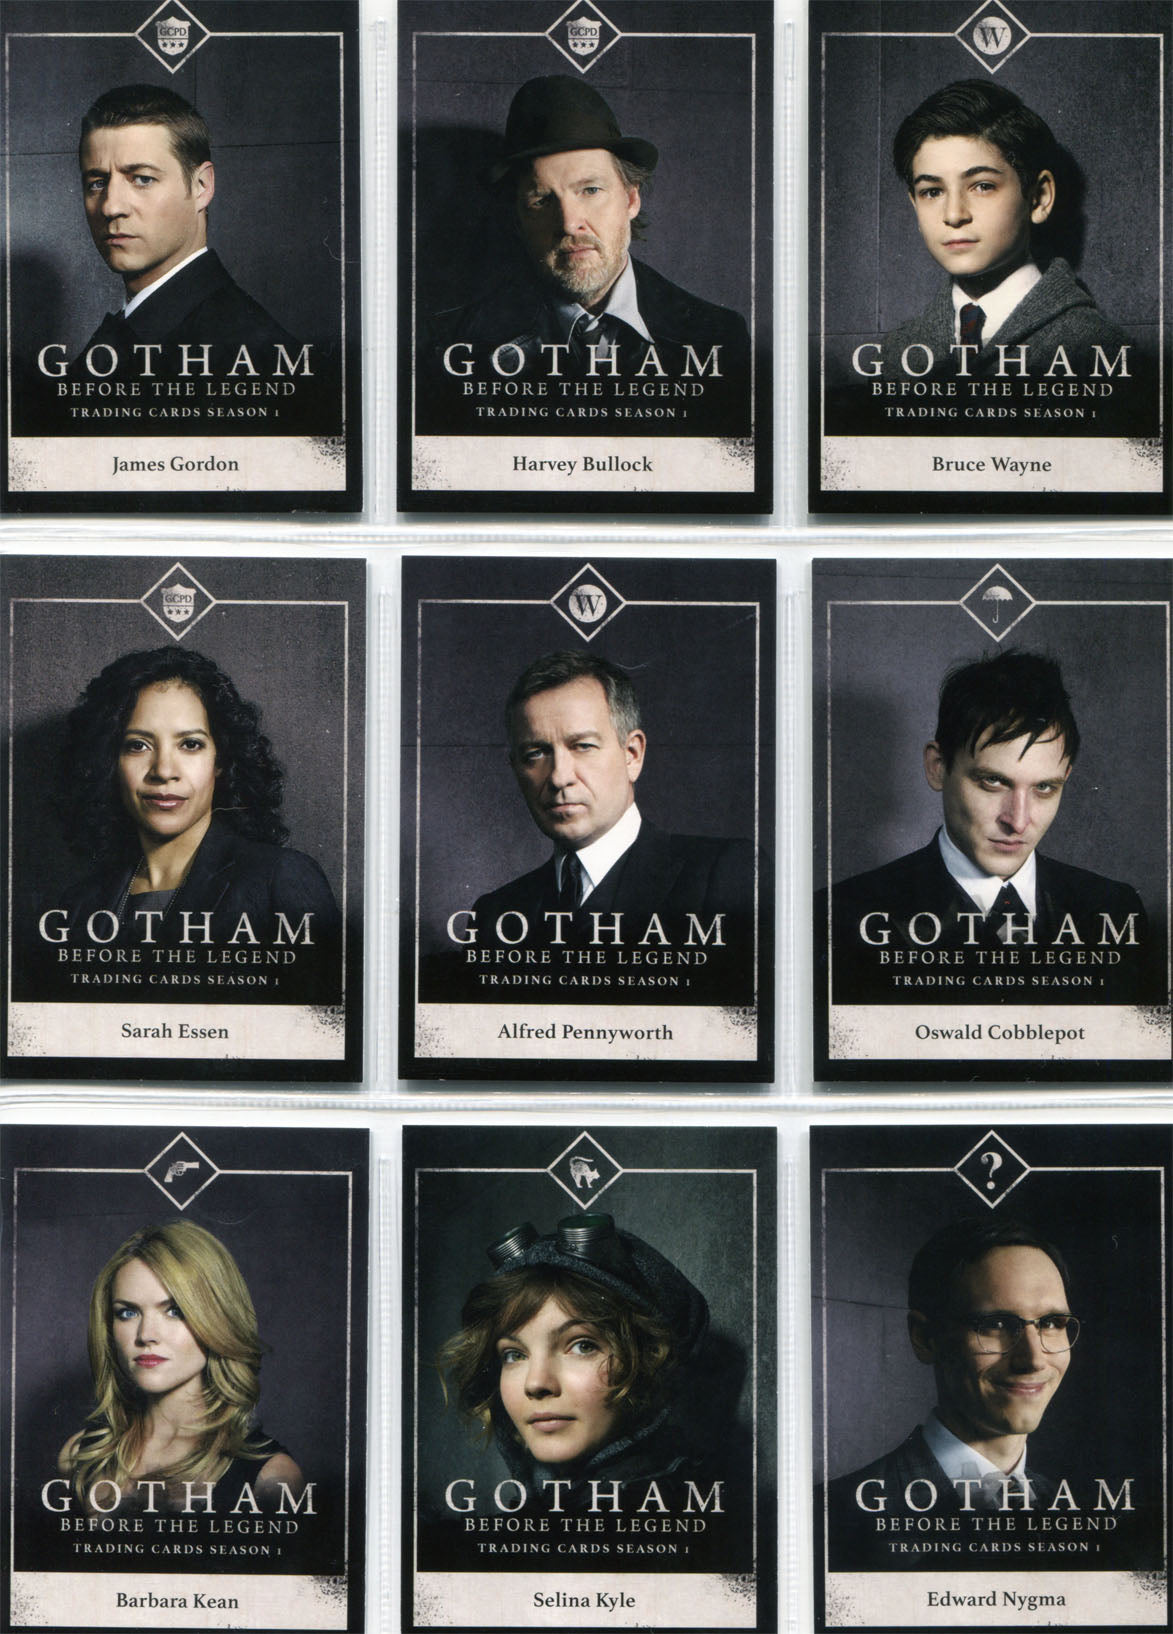 Gotham Season 1 Character Bios Complete 15 Chase Card Set C01 to C15